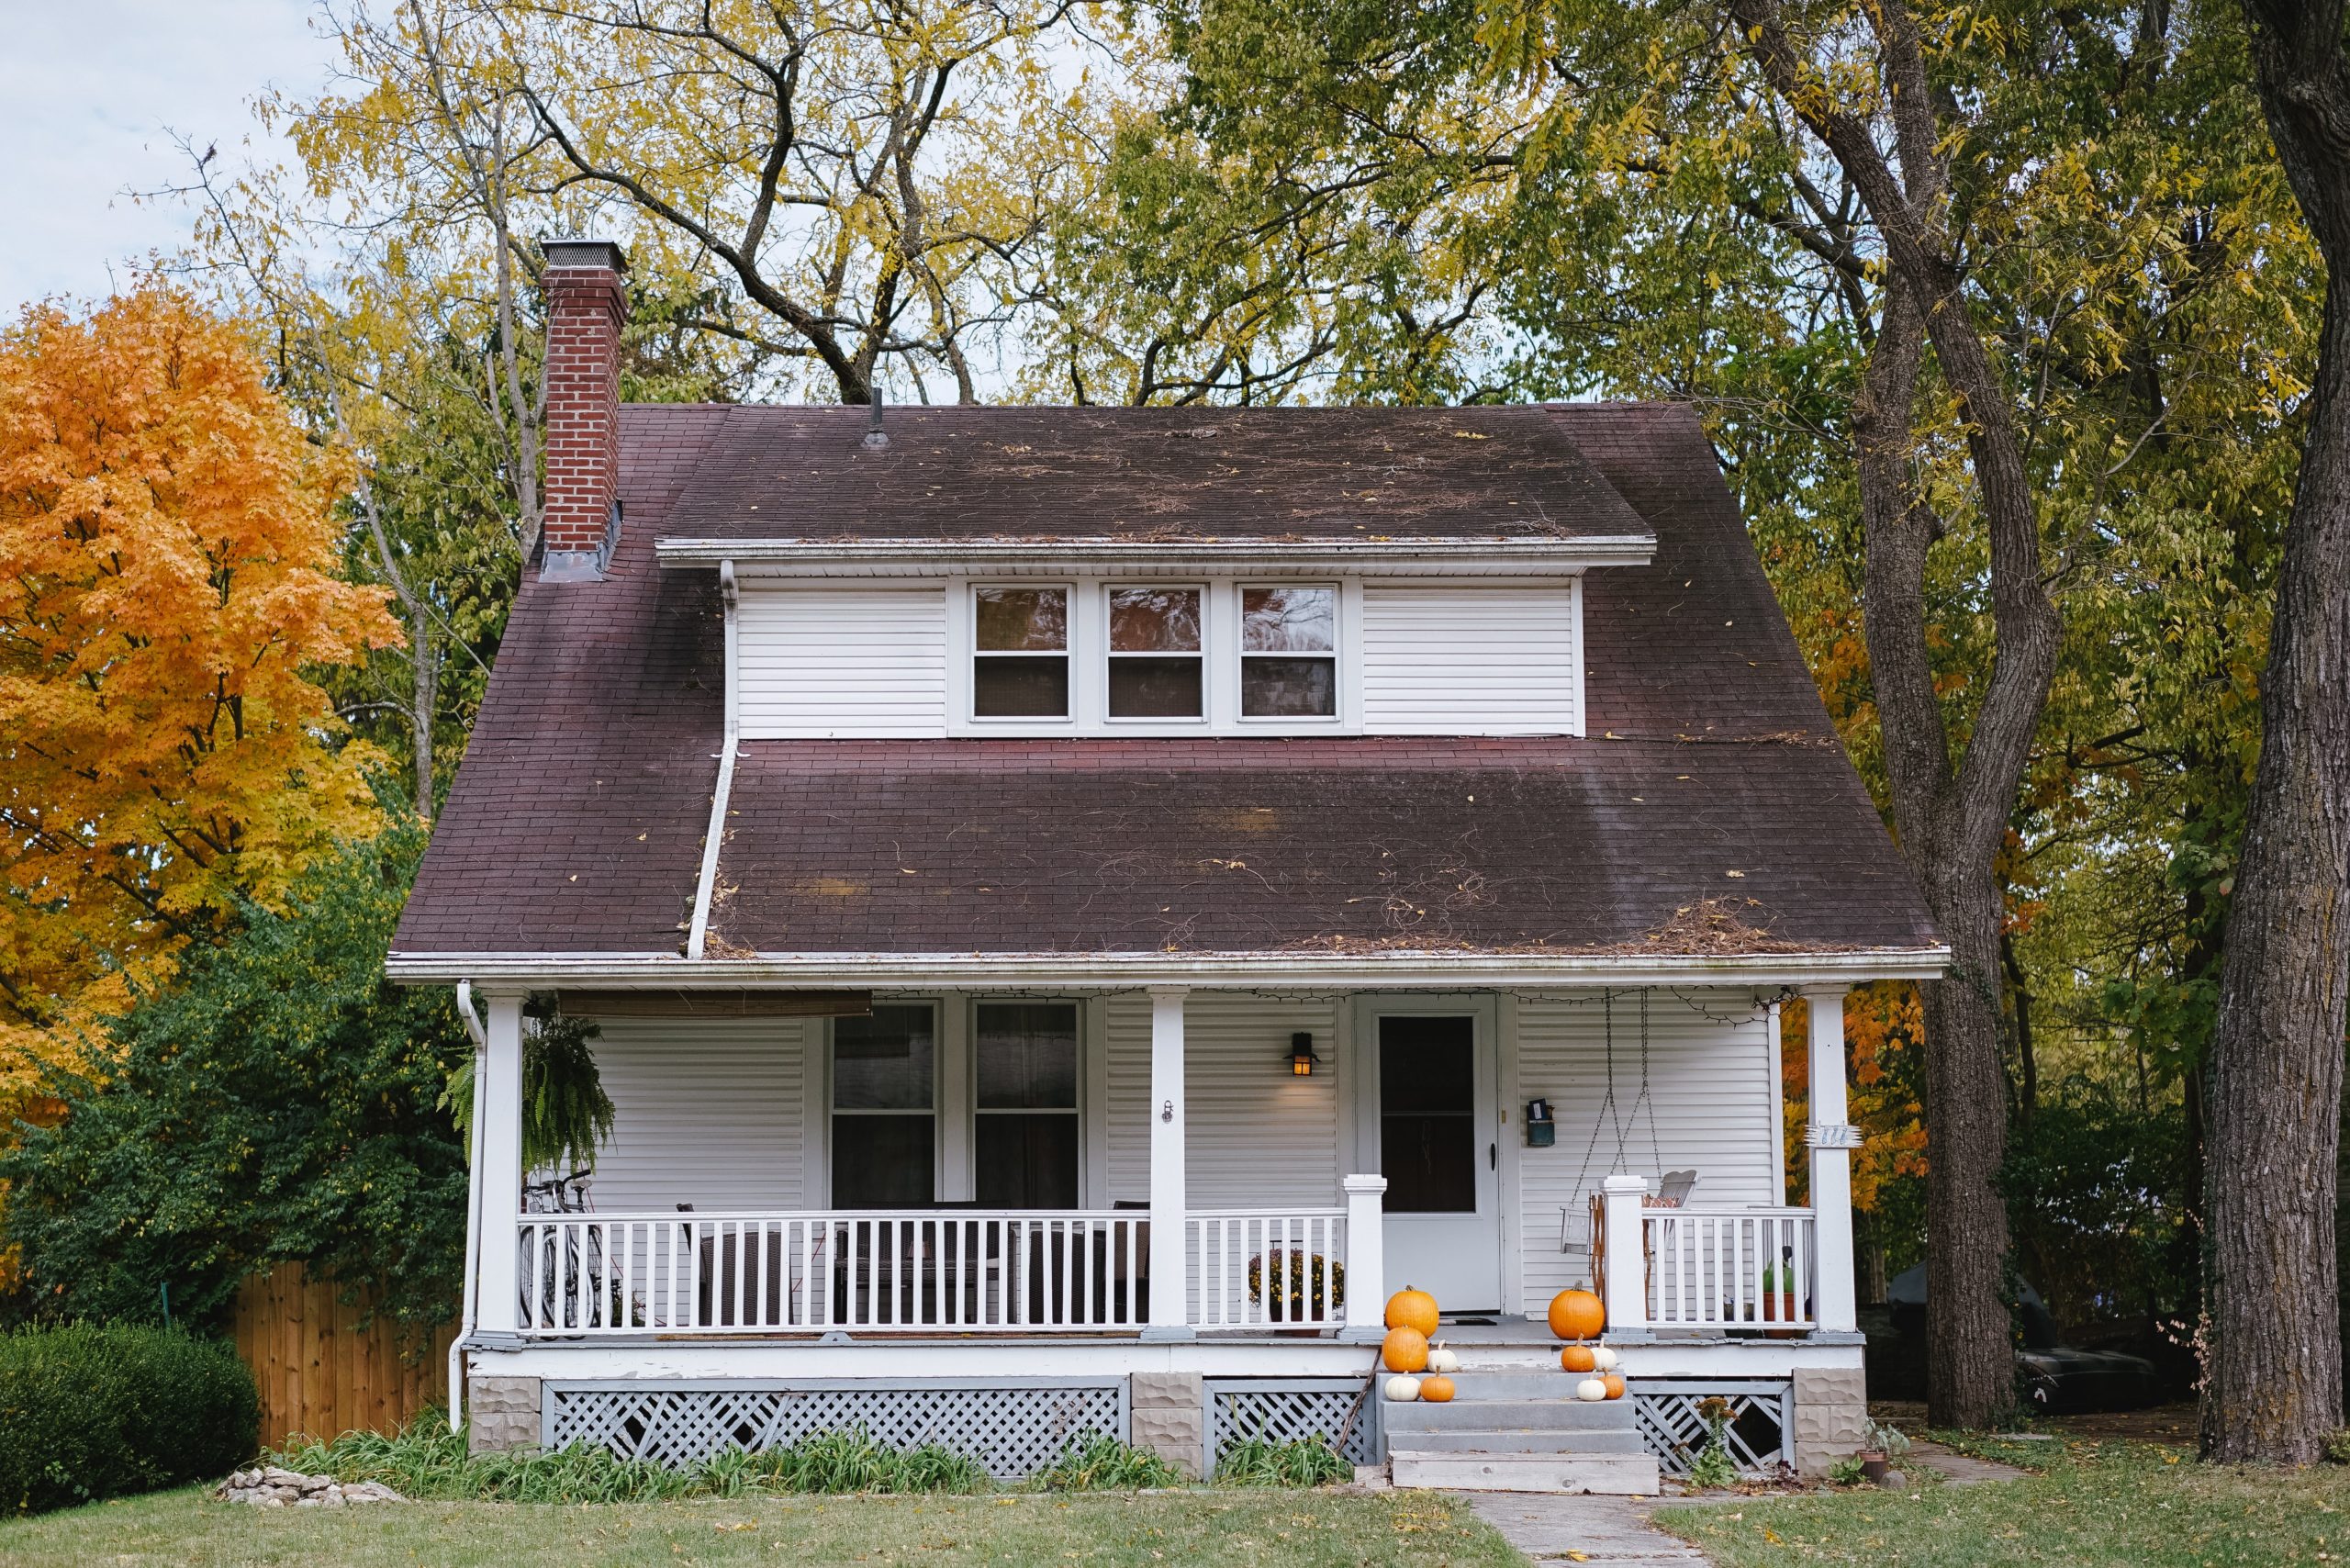 White two story house in a wooded area with pumpkins on the front porch